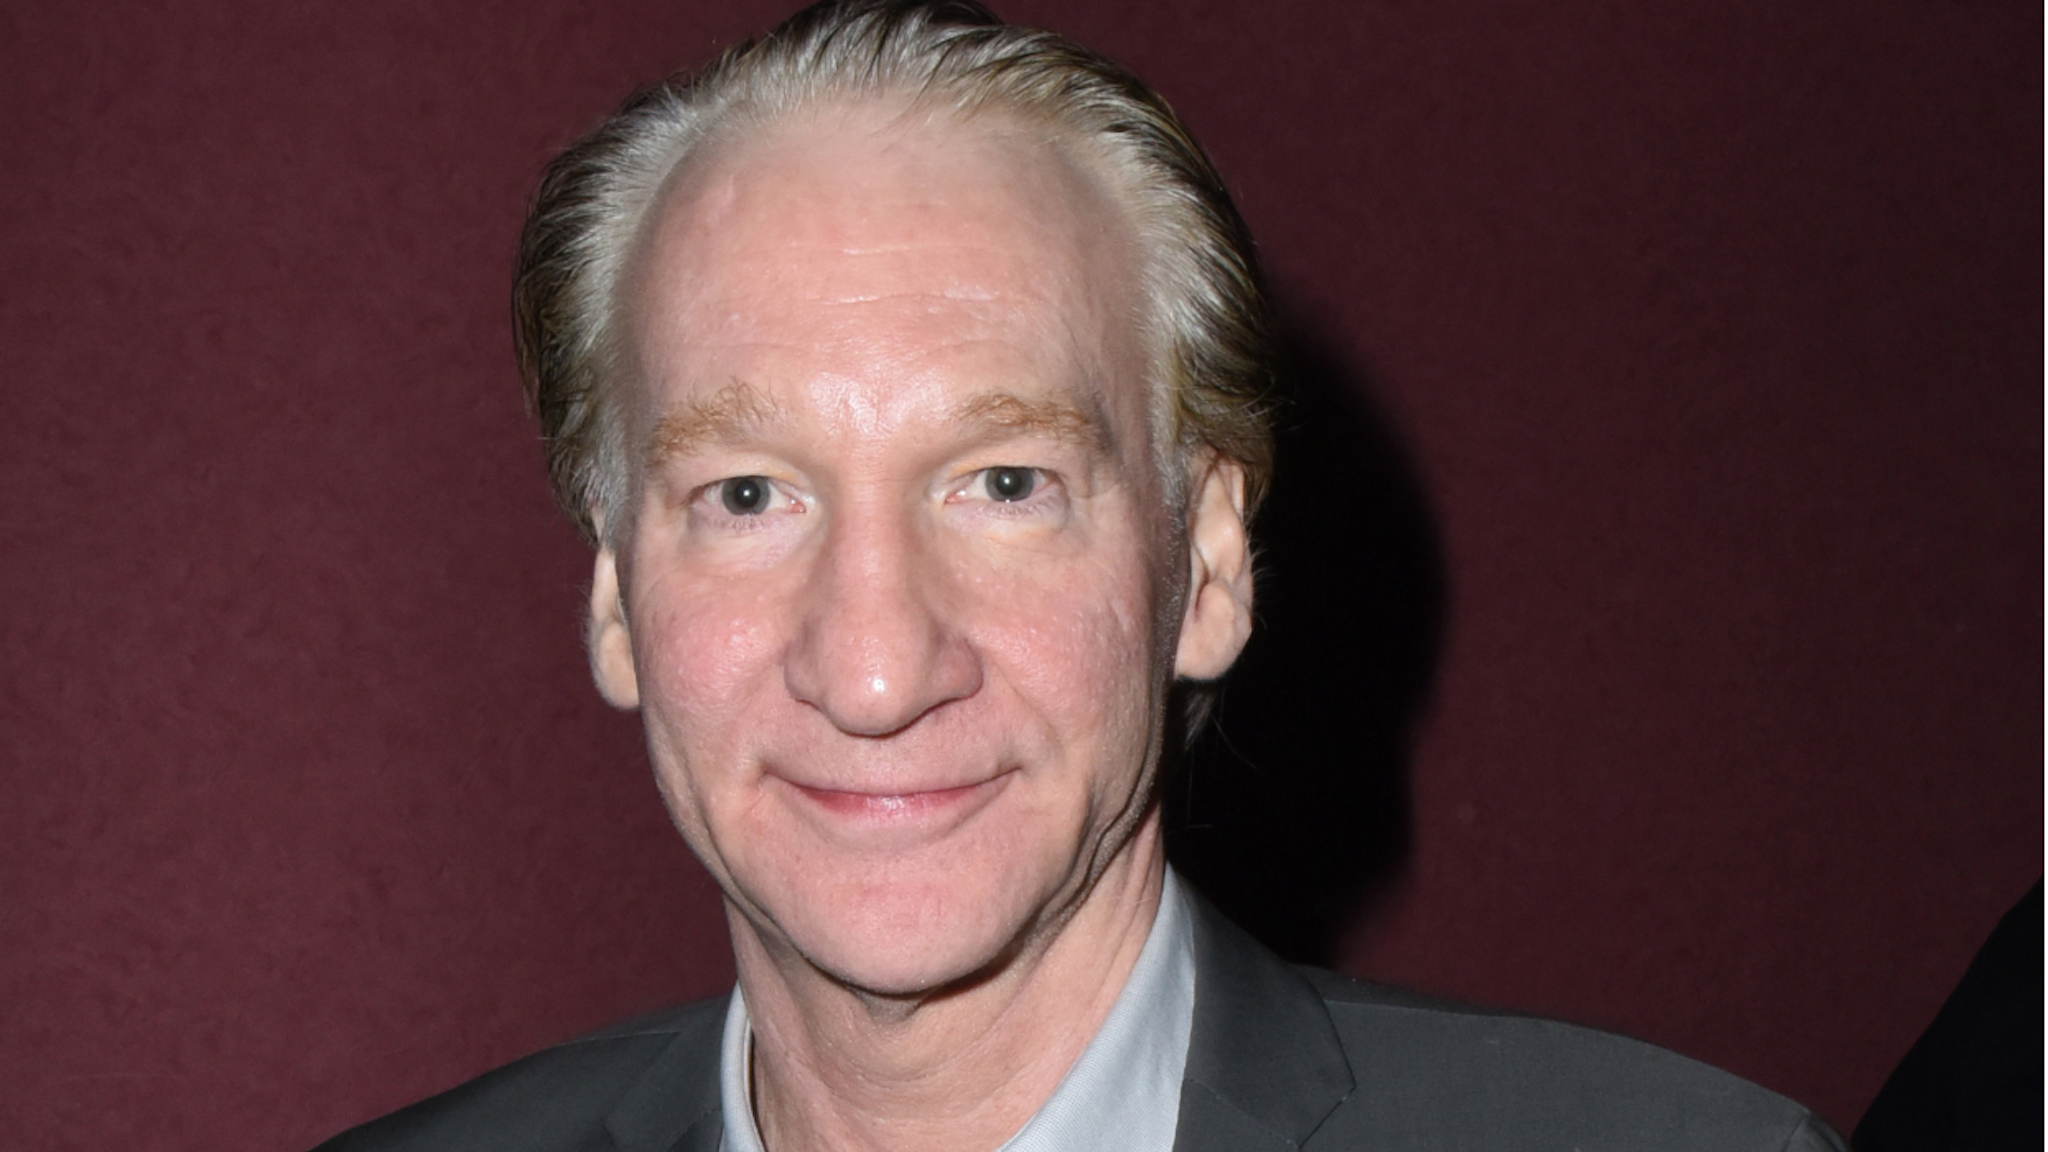 Bill Maher attends the Los Angeles Premiere of LBJ at ArcLight Hollywood on October 24, 2017 in Hollywood, California.